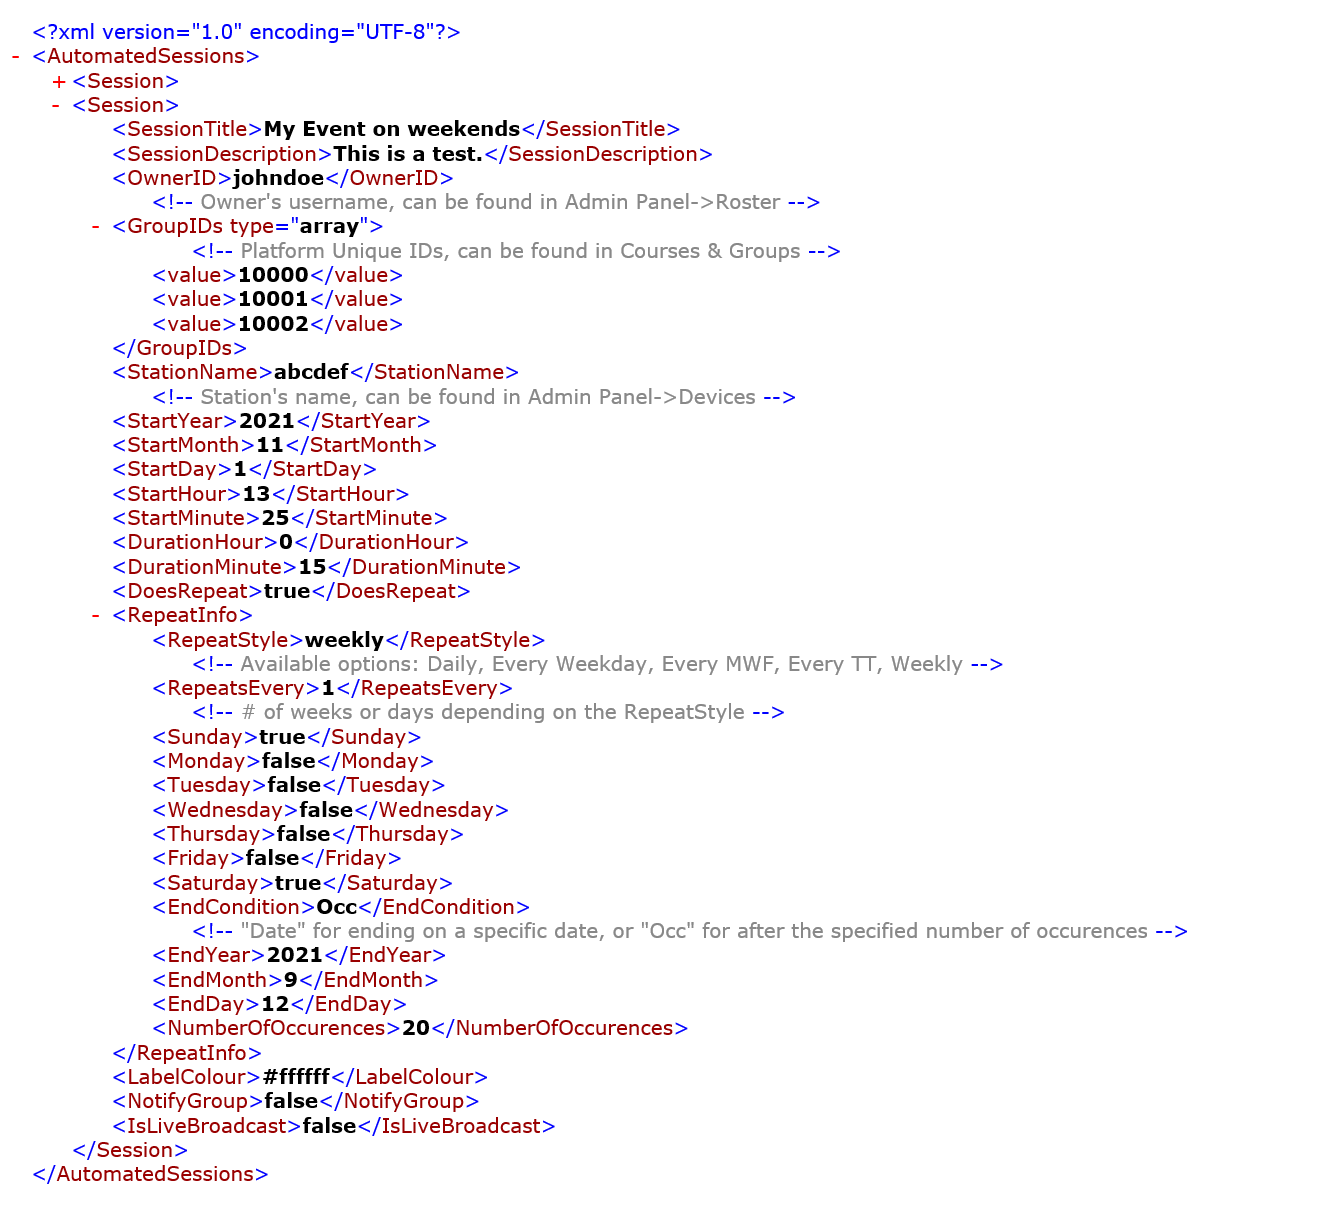 Example of an XML file.